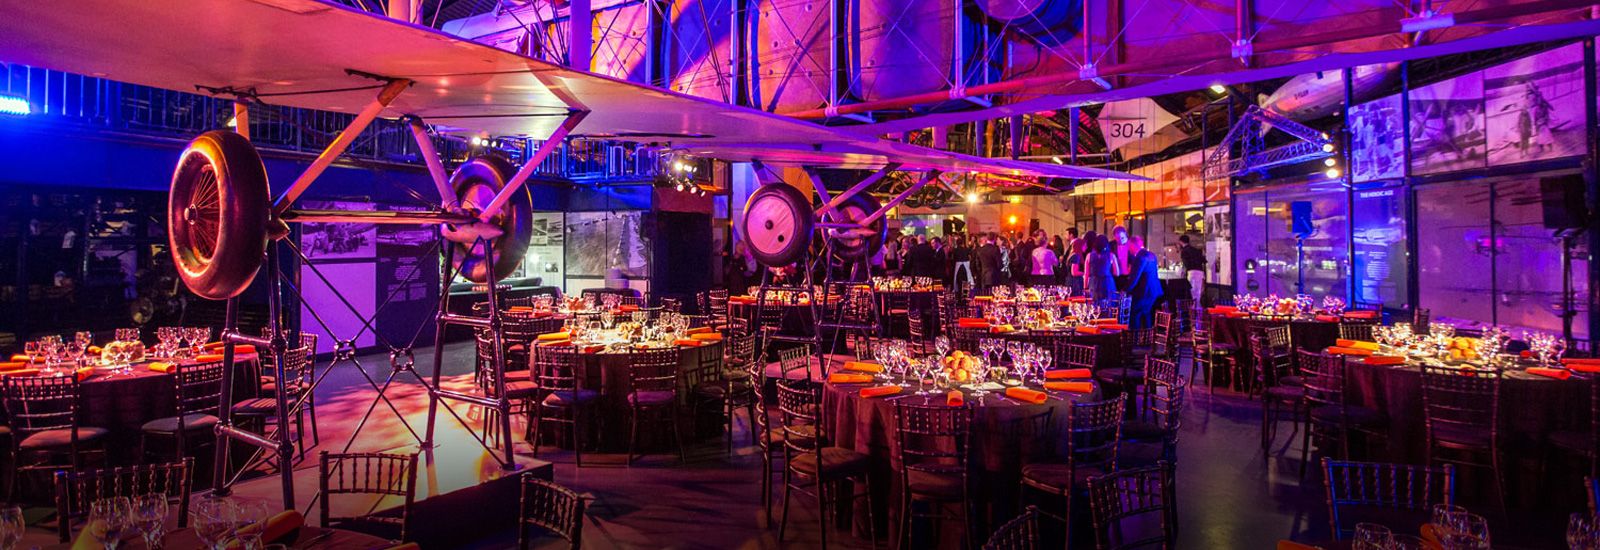 Flight gallery with round dressed tables at a corporate evening event